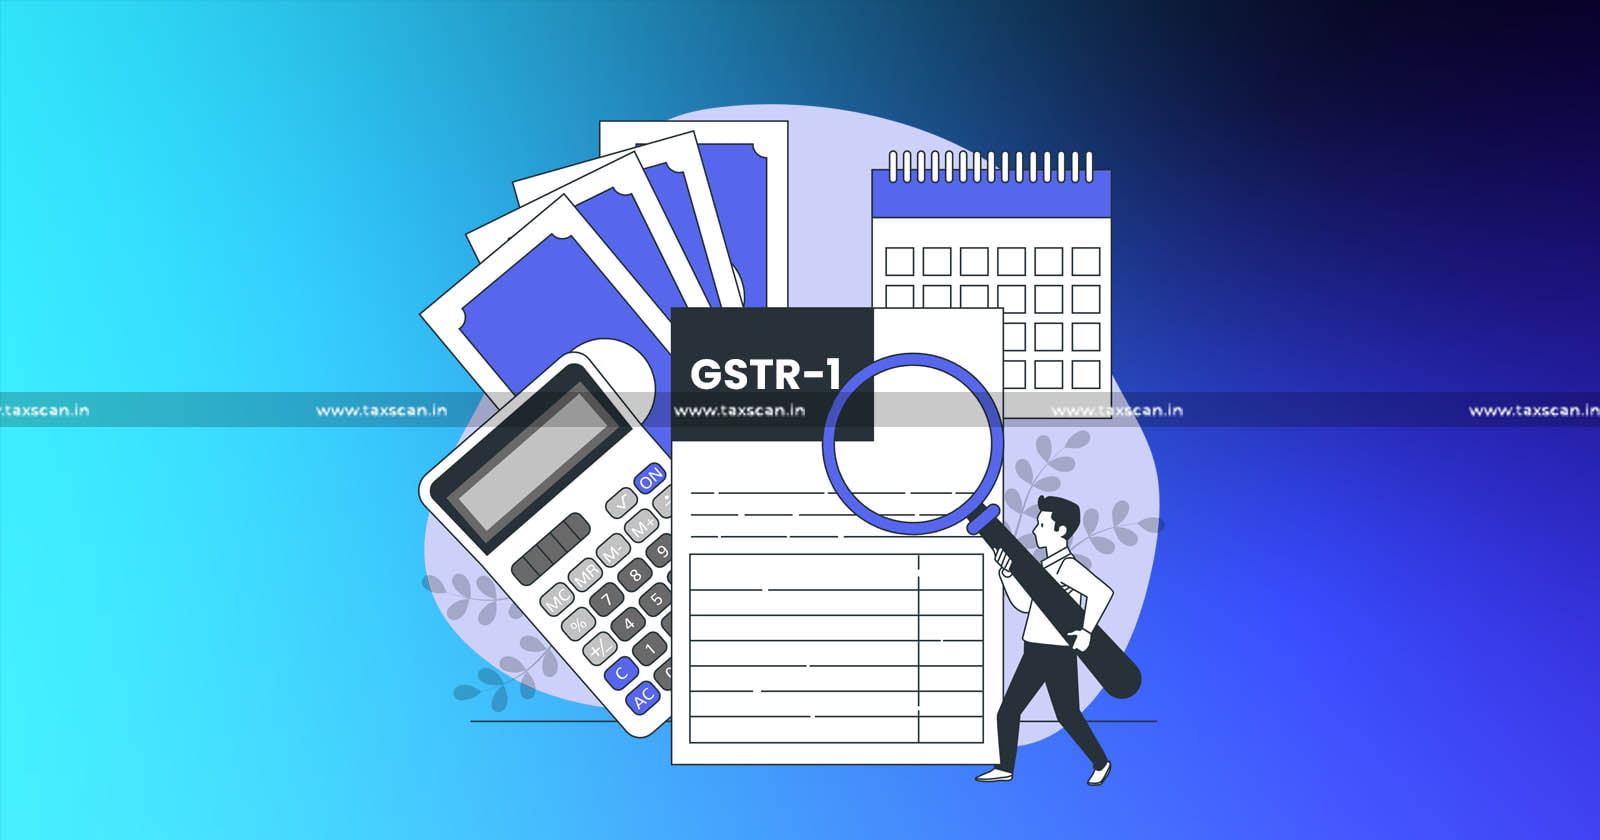 GSTR-1 Turnover Reporting Error Leads - Tax Liability - Madras HC Quashes DRC-07 - Grants Opportunity to Contest - taxscan